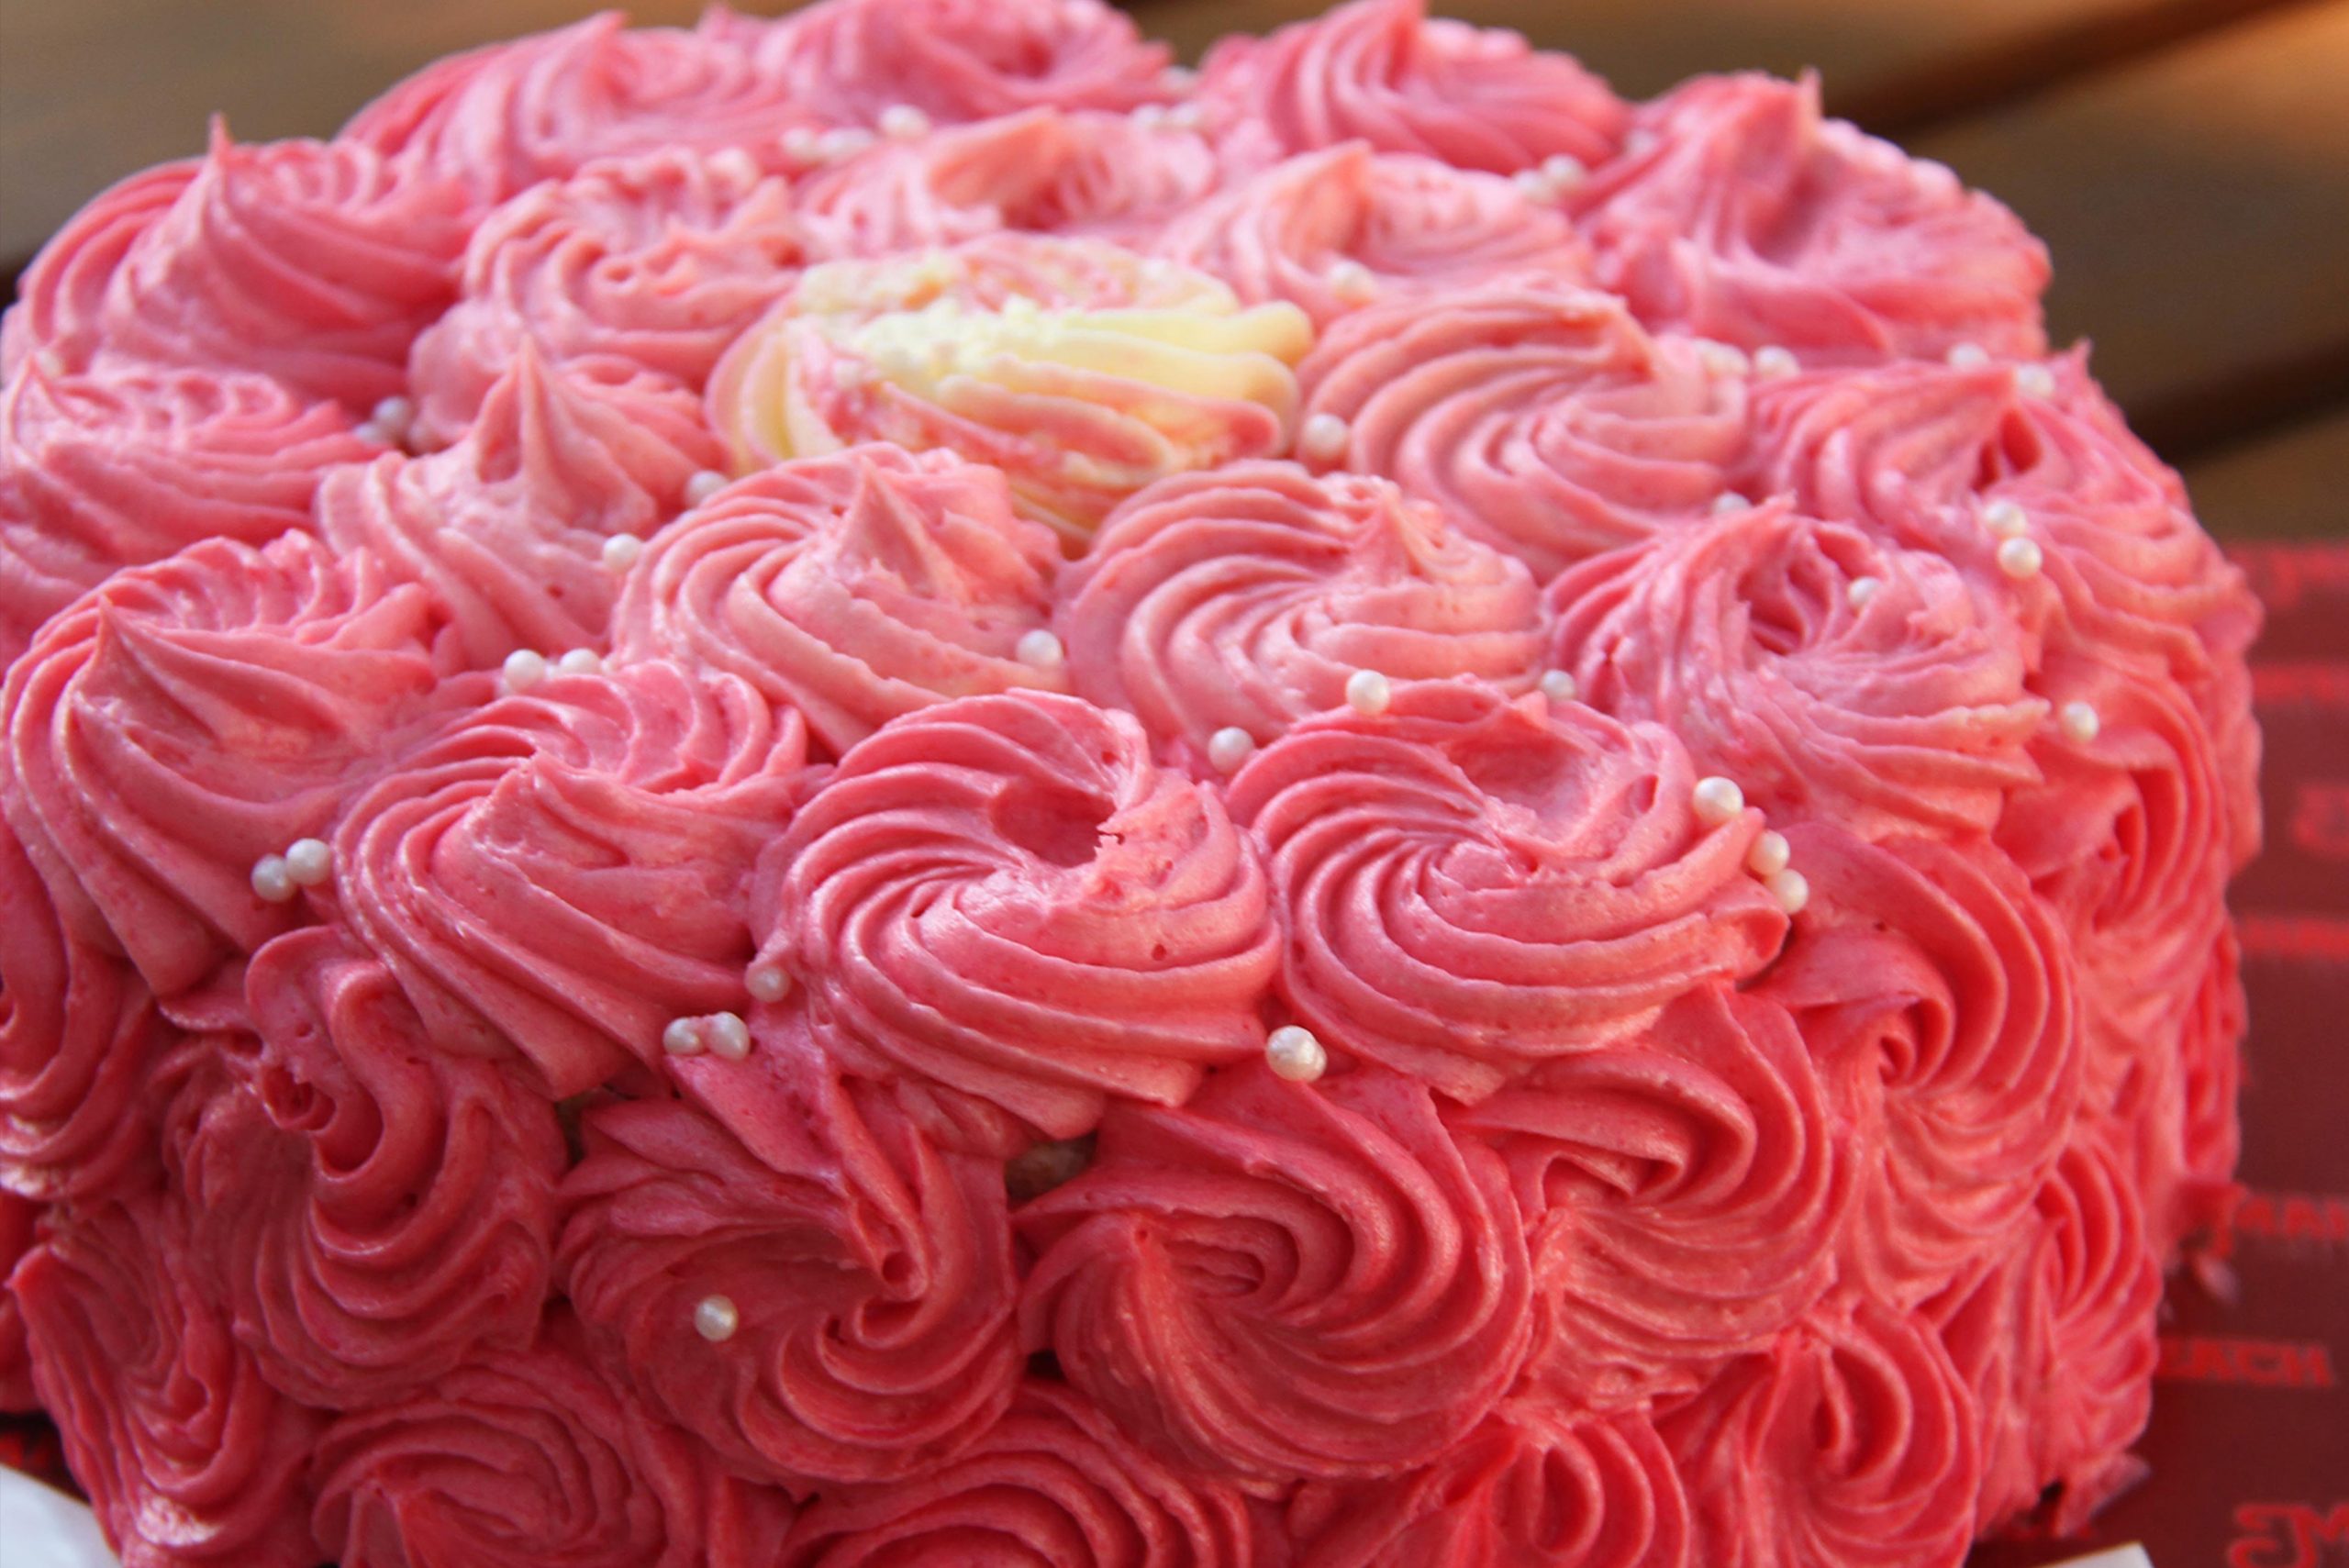 Rose Swirl Buttercream (Cake Flavor: Chocolate, Buttercream Filling:  Coffee, and Size: 8”)